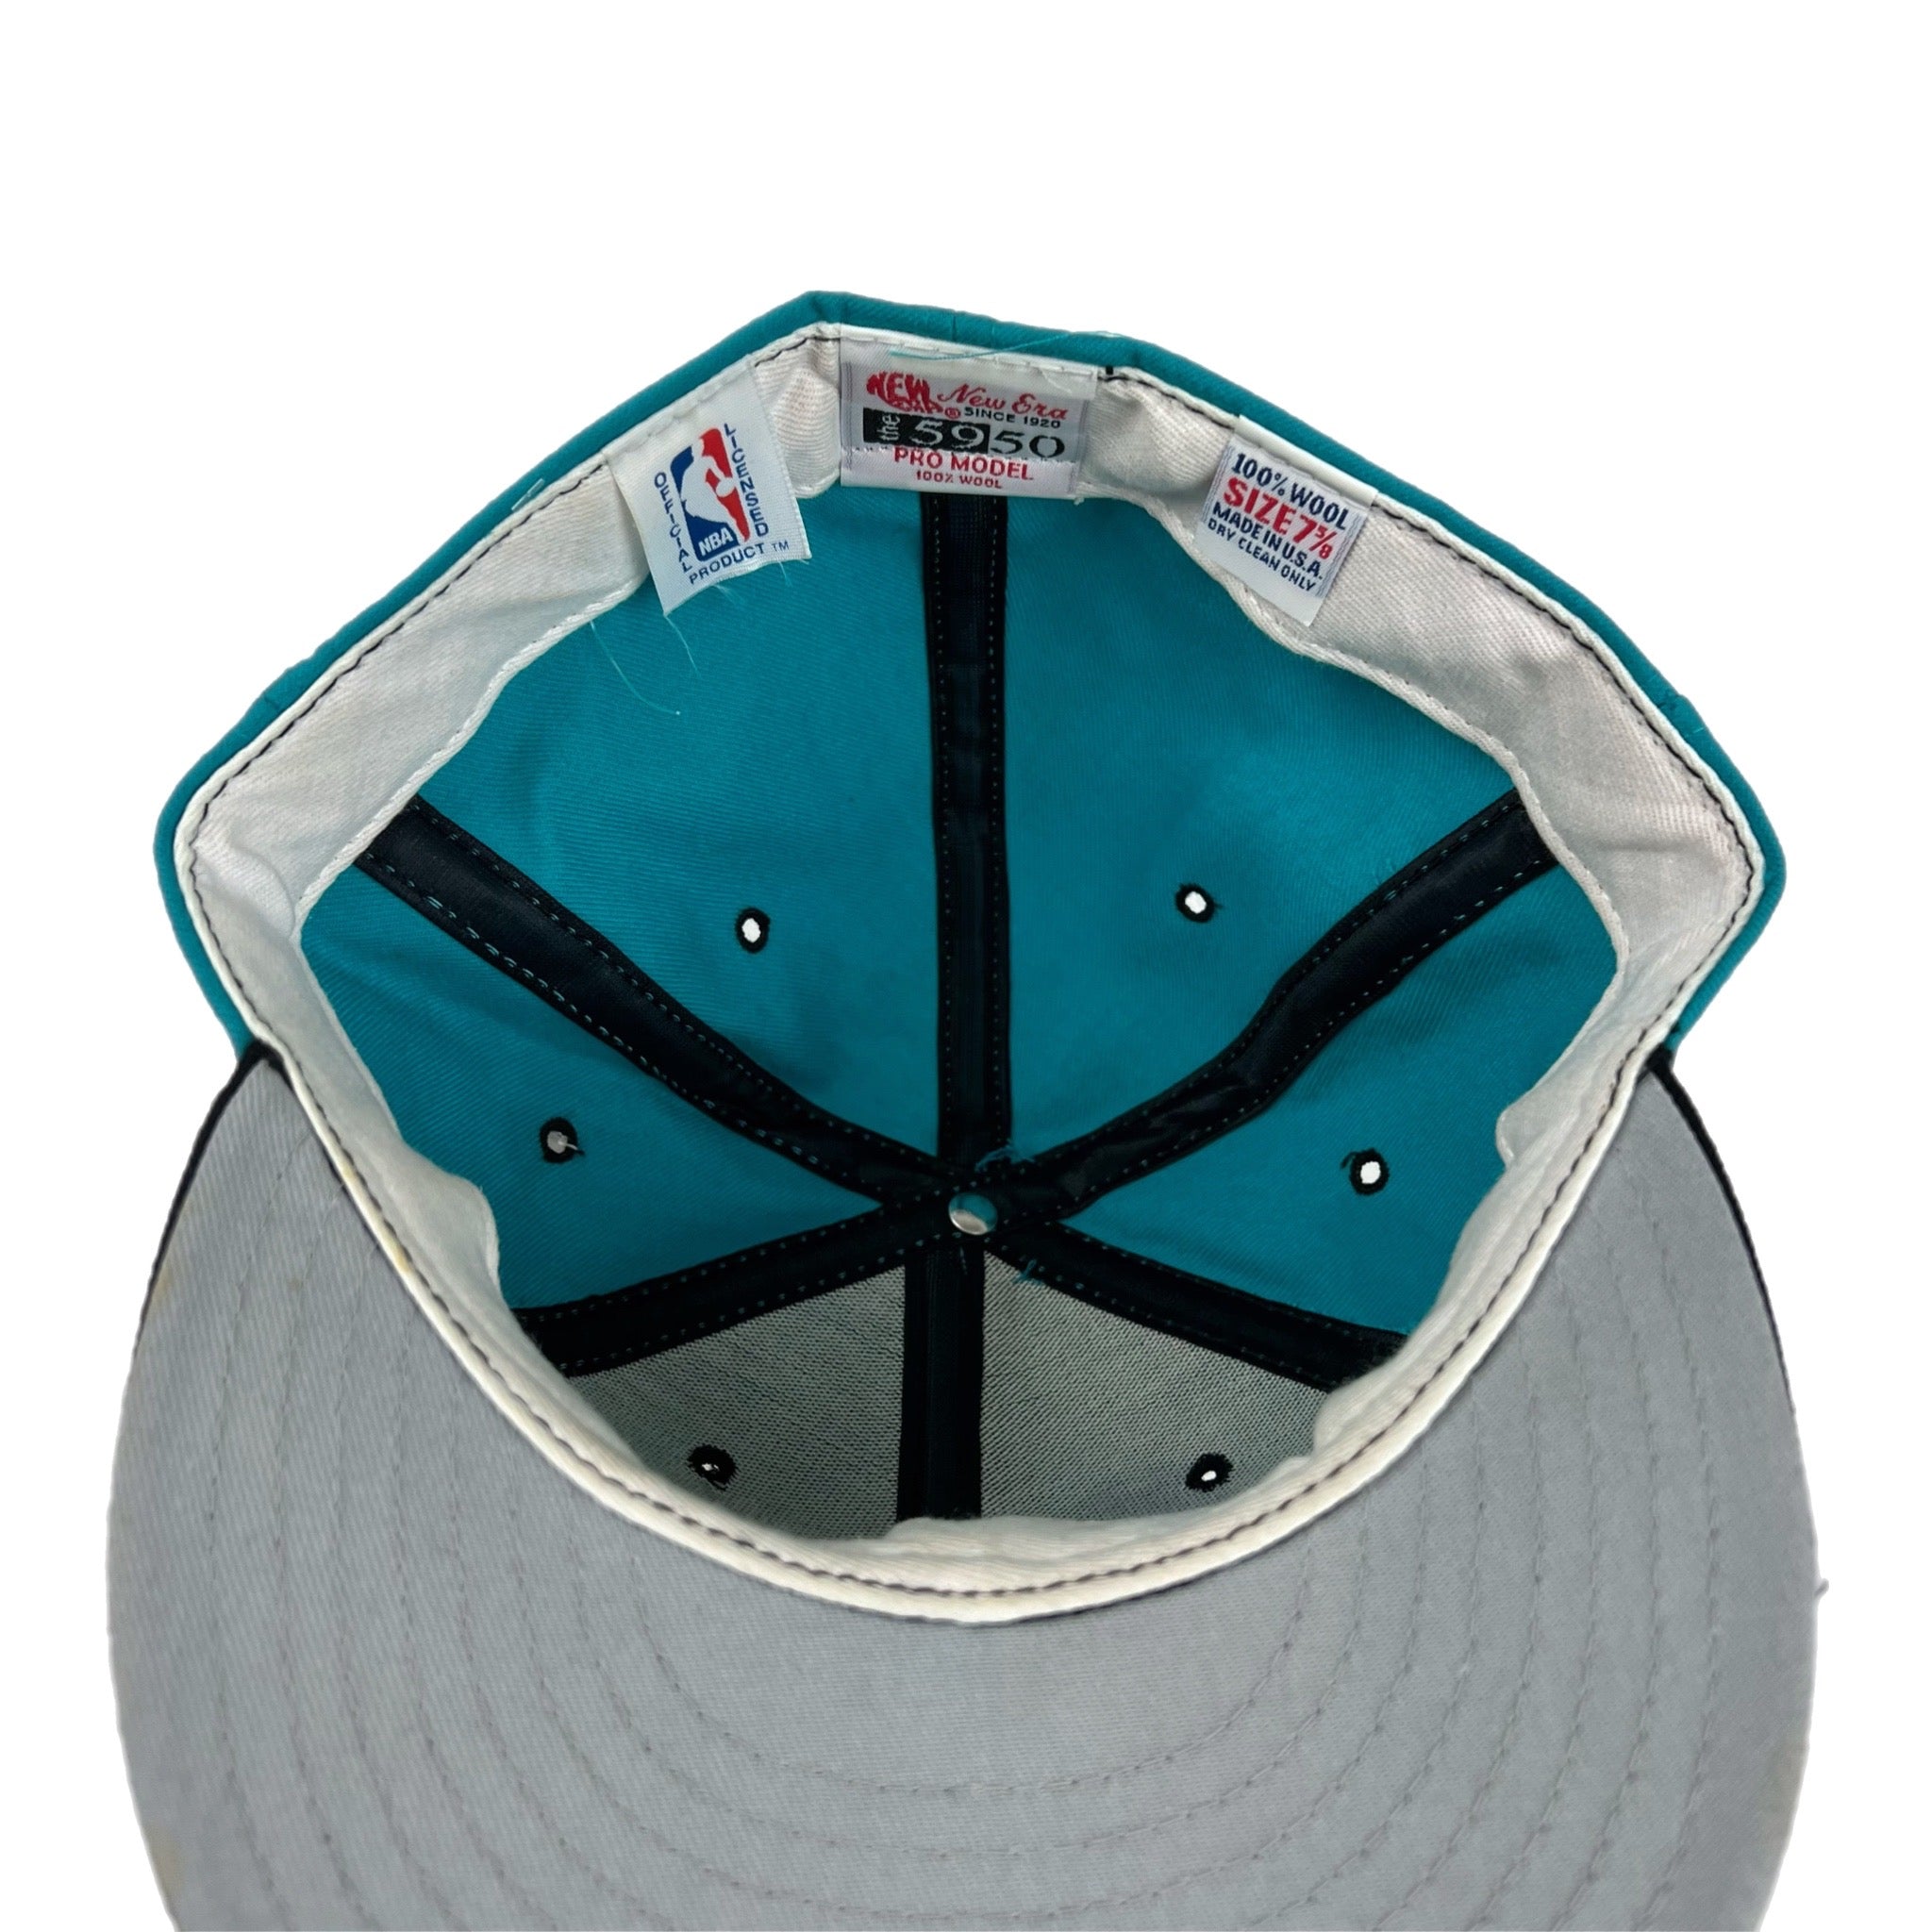 1994 New Era Vancouver Grizzlies Fitted Hat